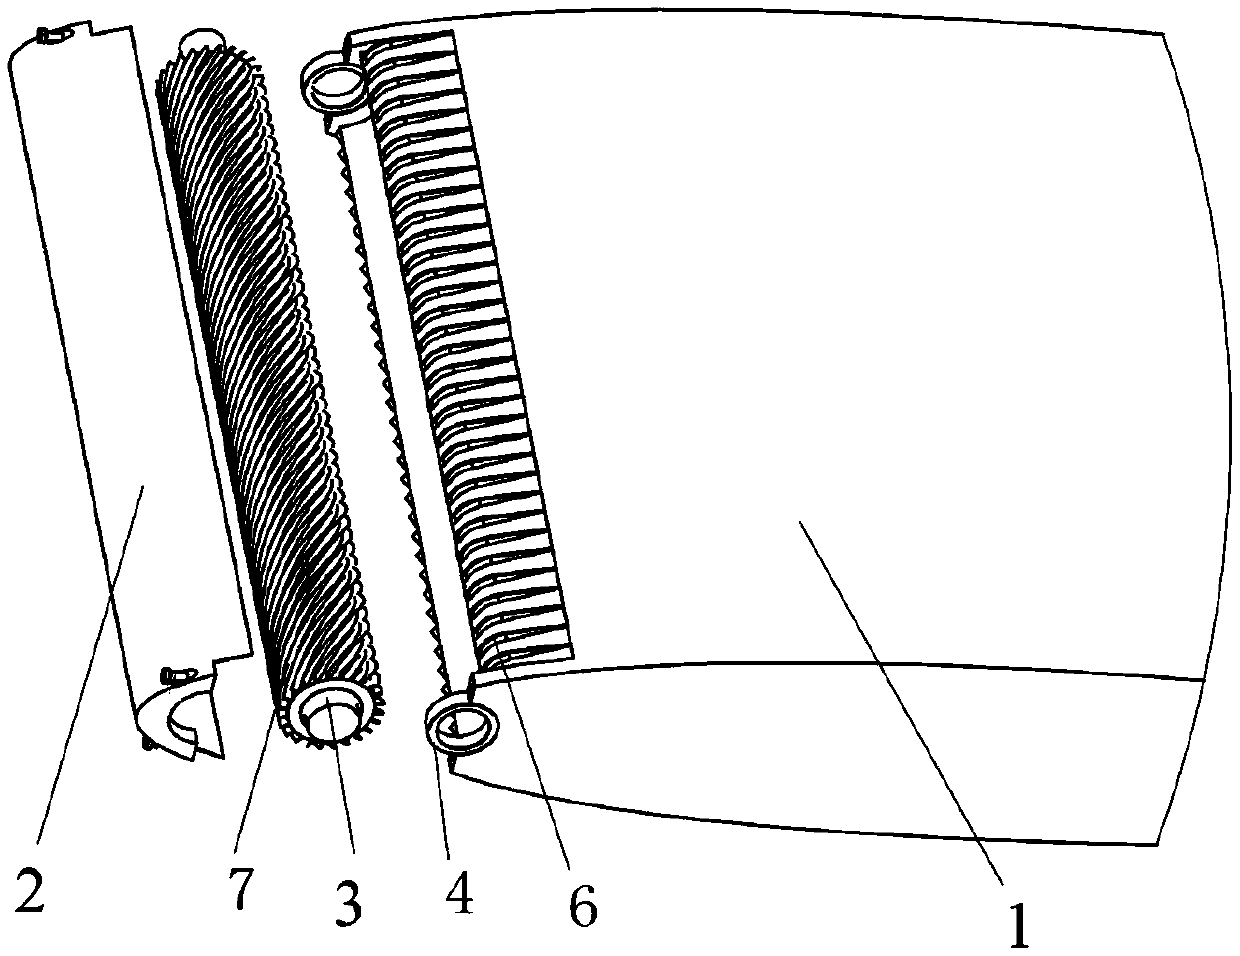 Blade boundary layer suction jet device